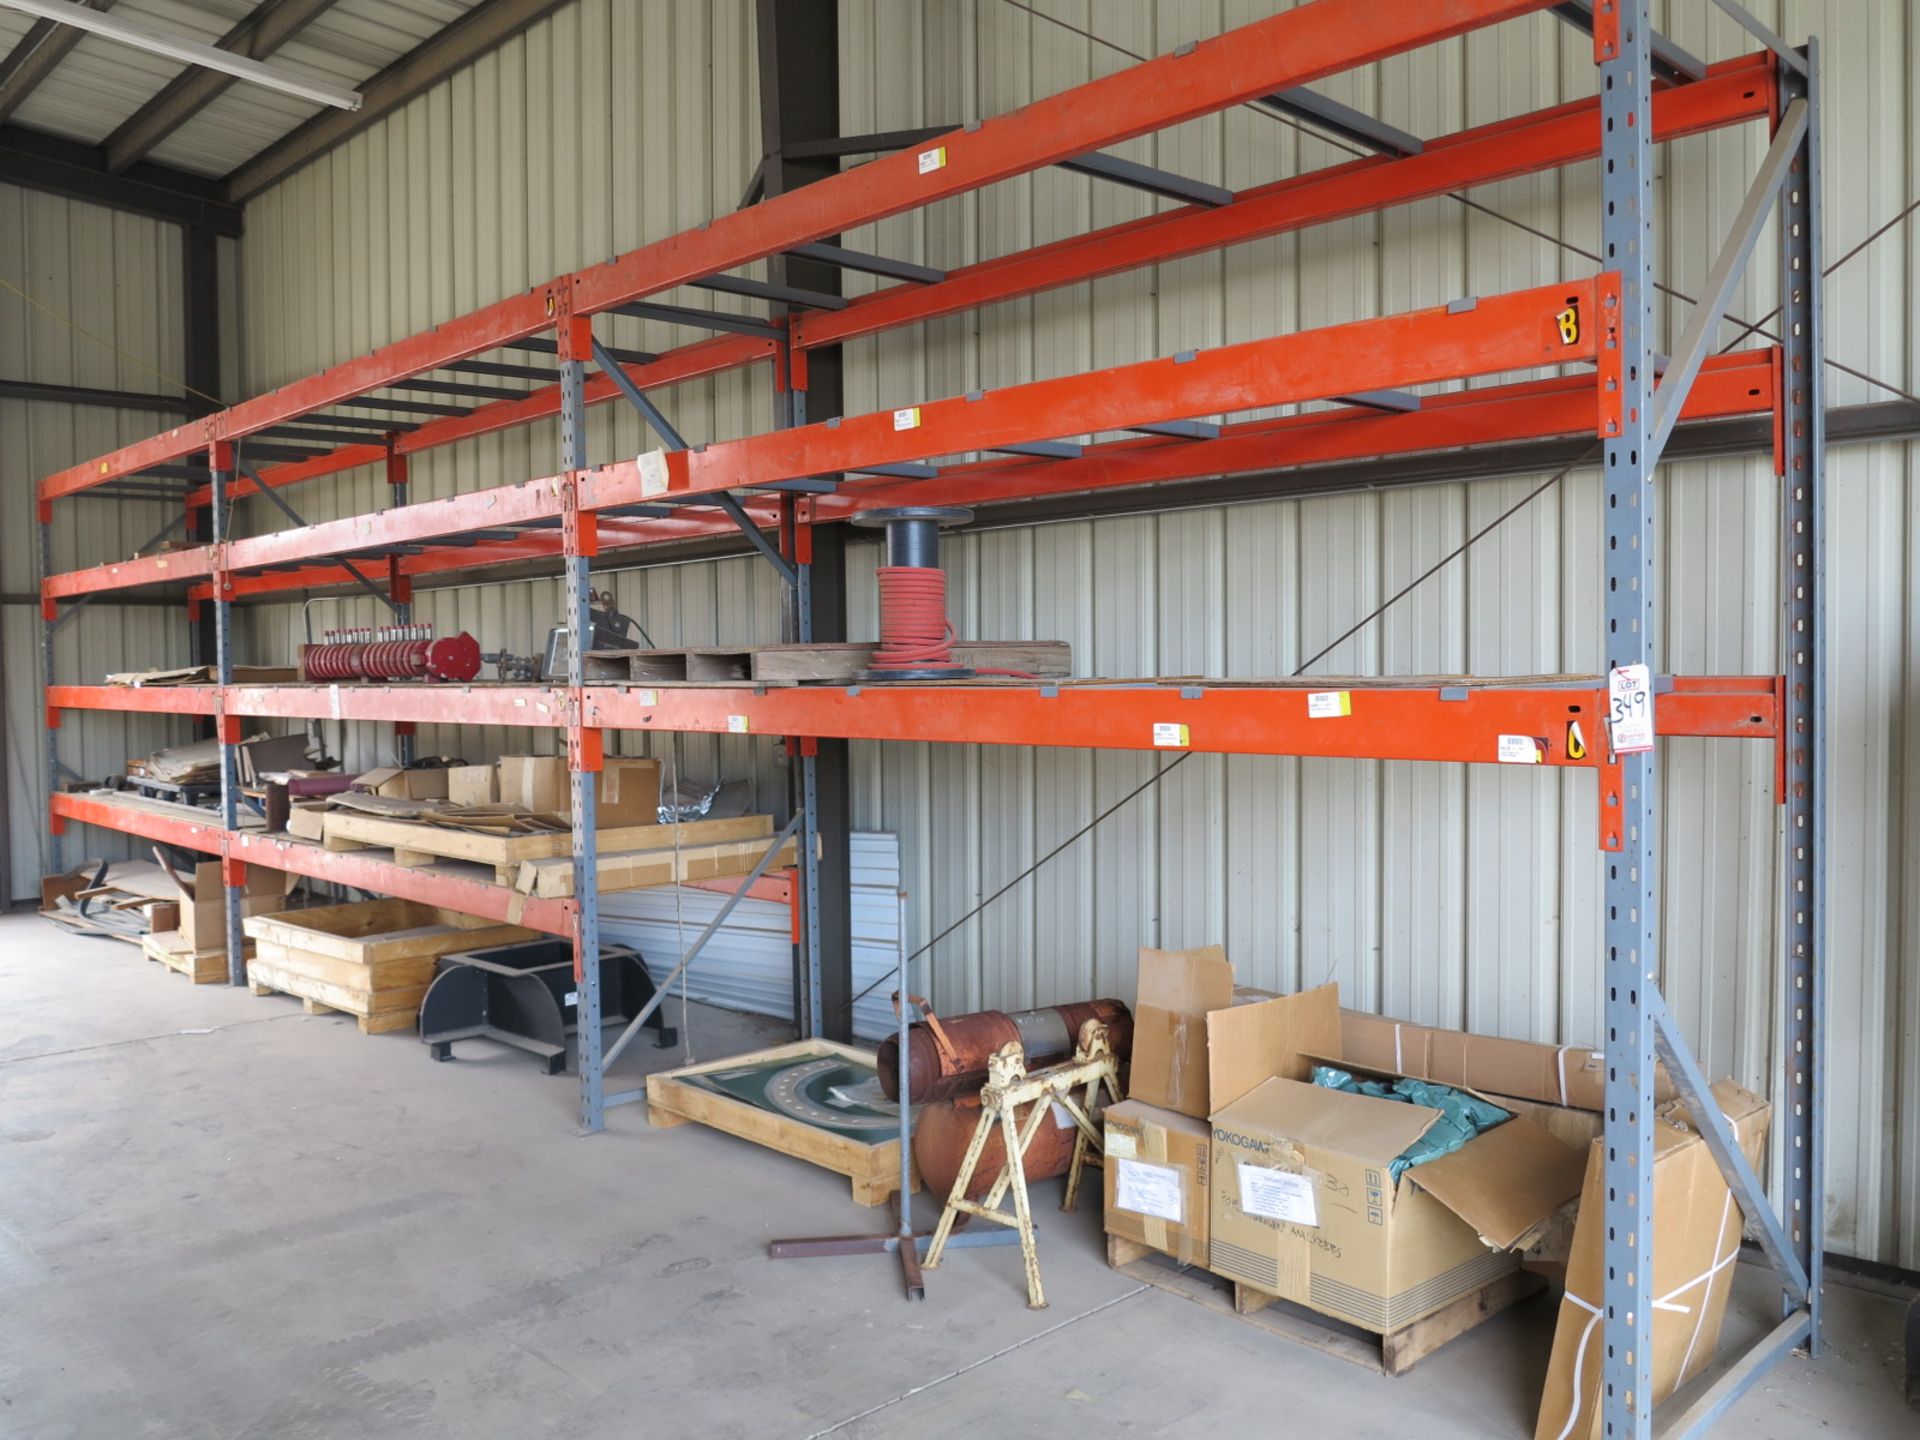 LOT - (5) SECTIONS OF PALLET RACK, 12' BEAMS, 10' UPRIGHTS, CONTENTS NOT INCLUDED